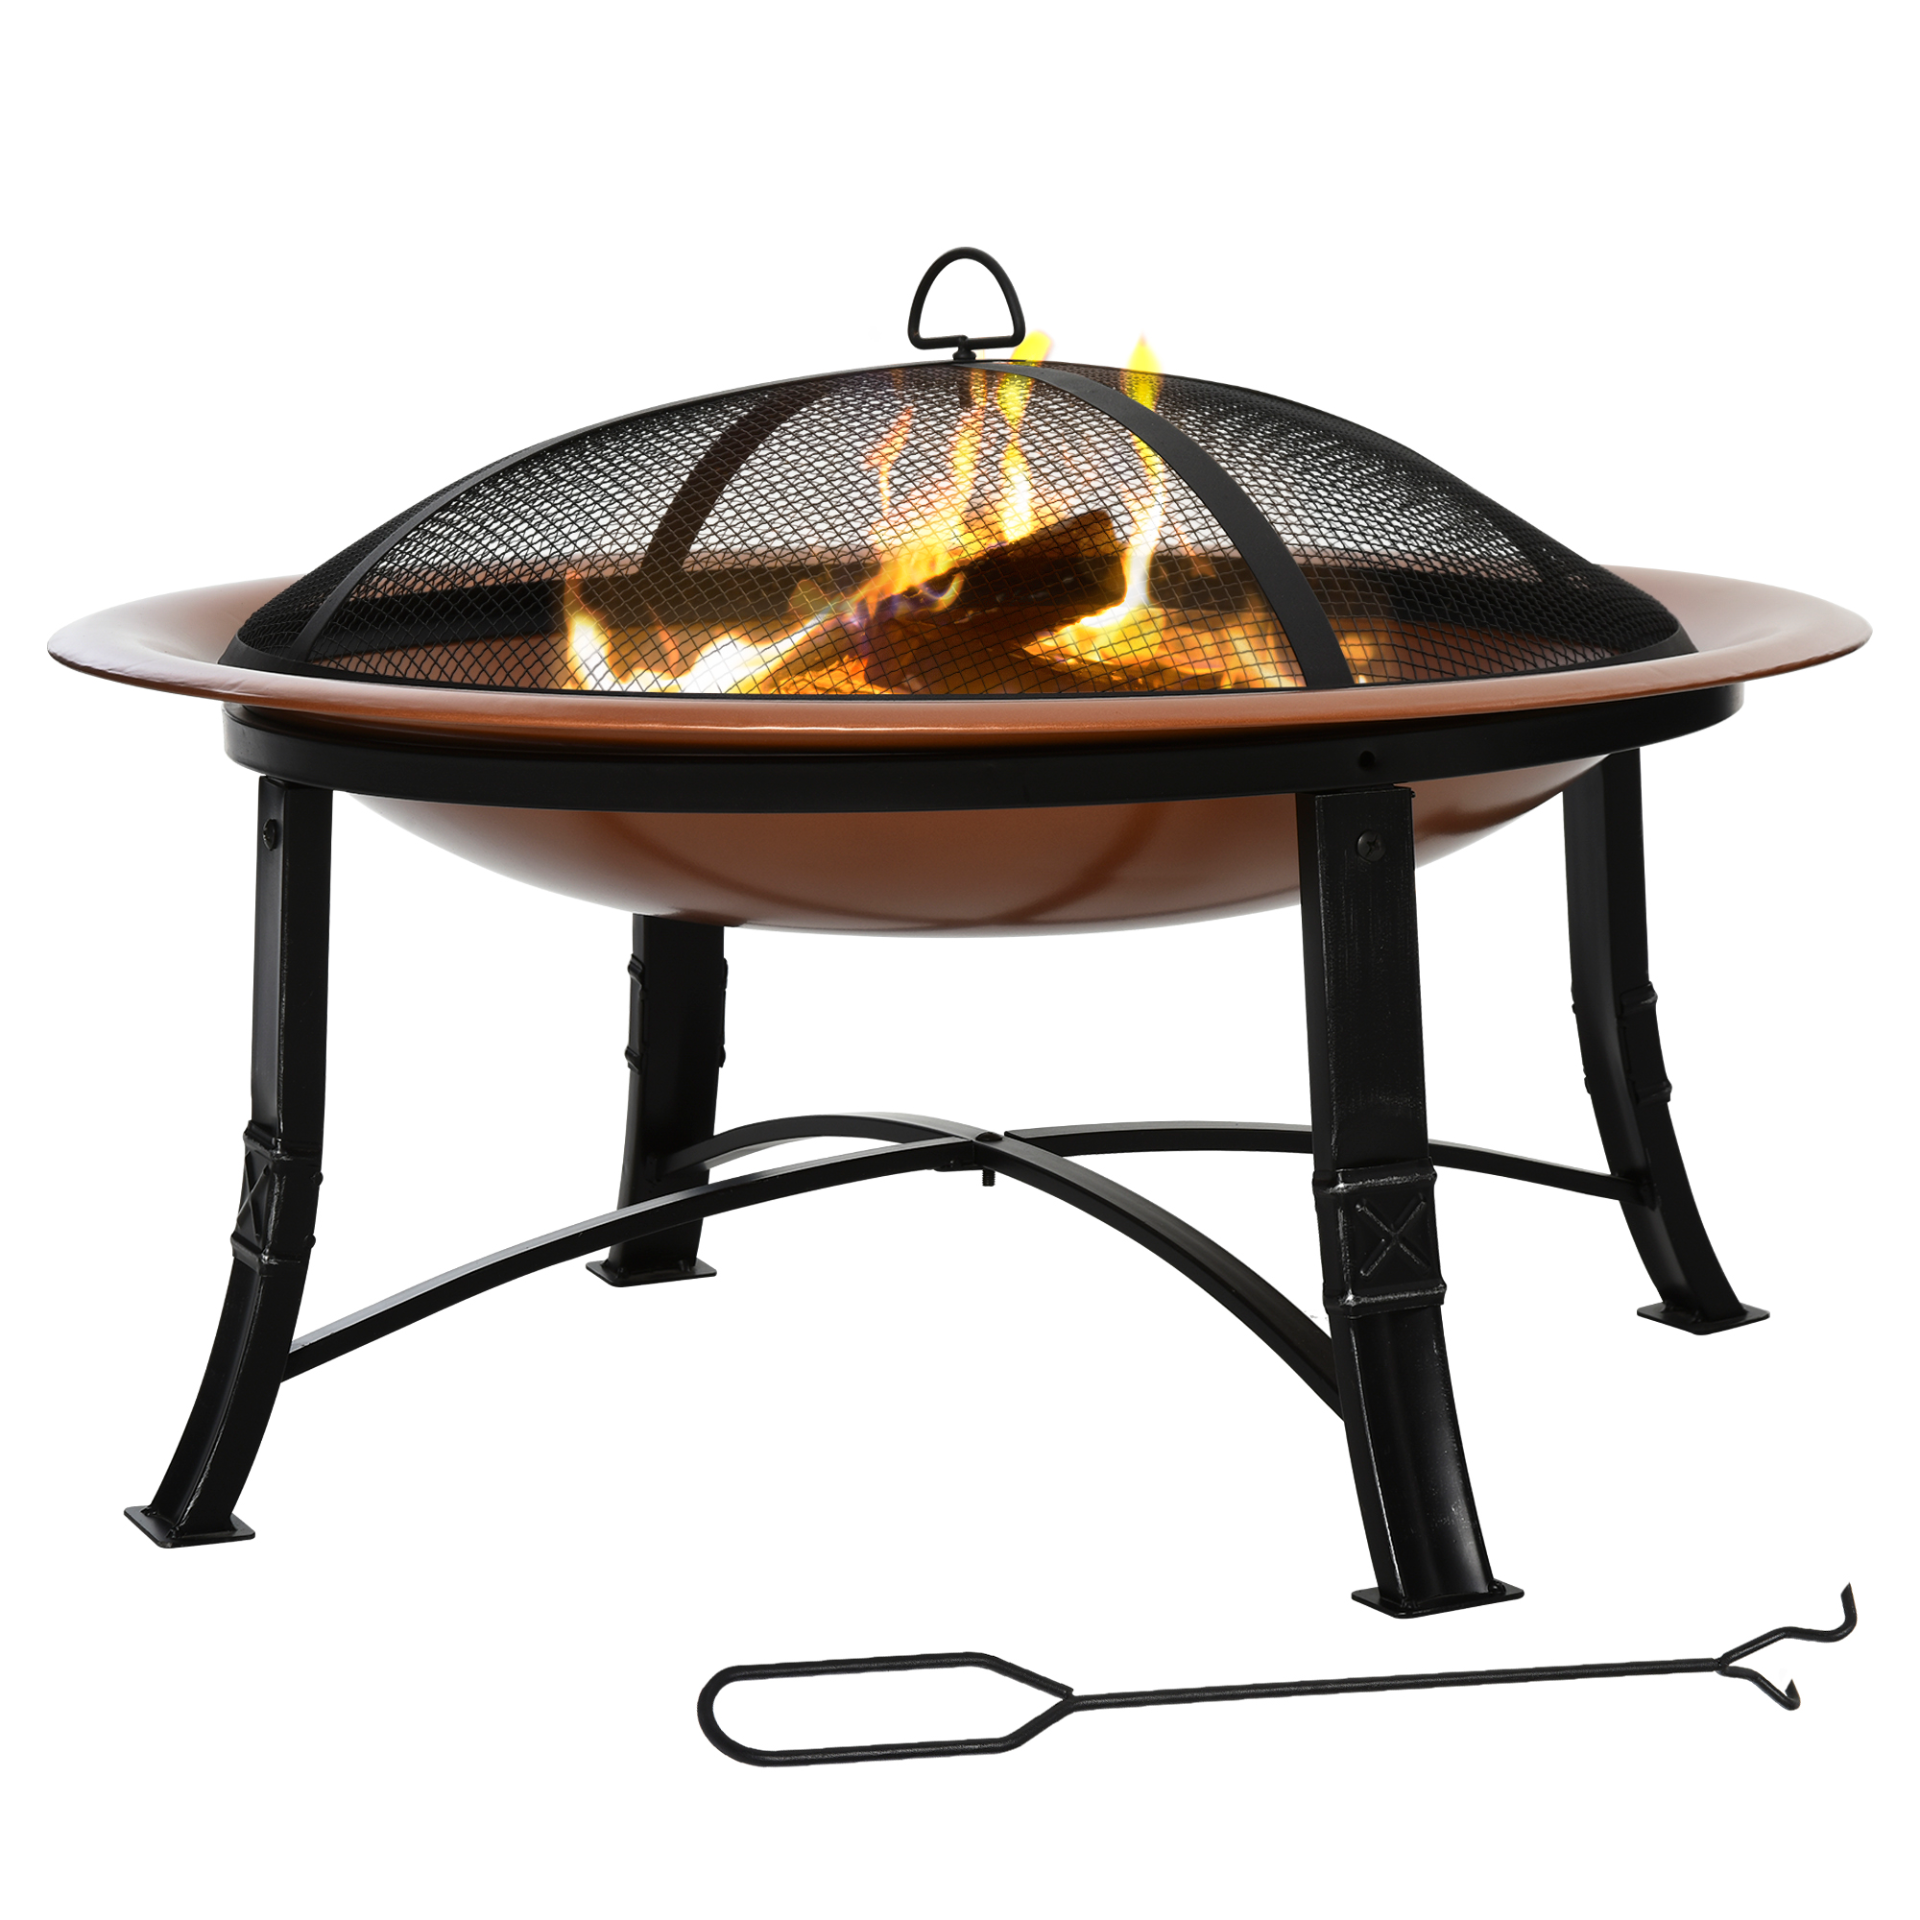 Outsunny Metal Large Firepit Bowl Outdoor Round Fire Pit with Lid, Log Grate, and Poker - Bronze Firepit Cosy Camping Co. Bronze  